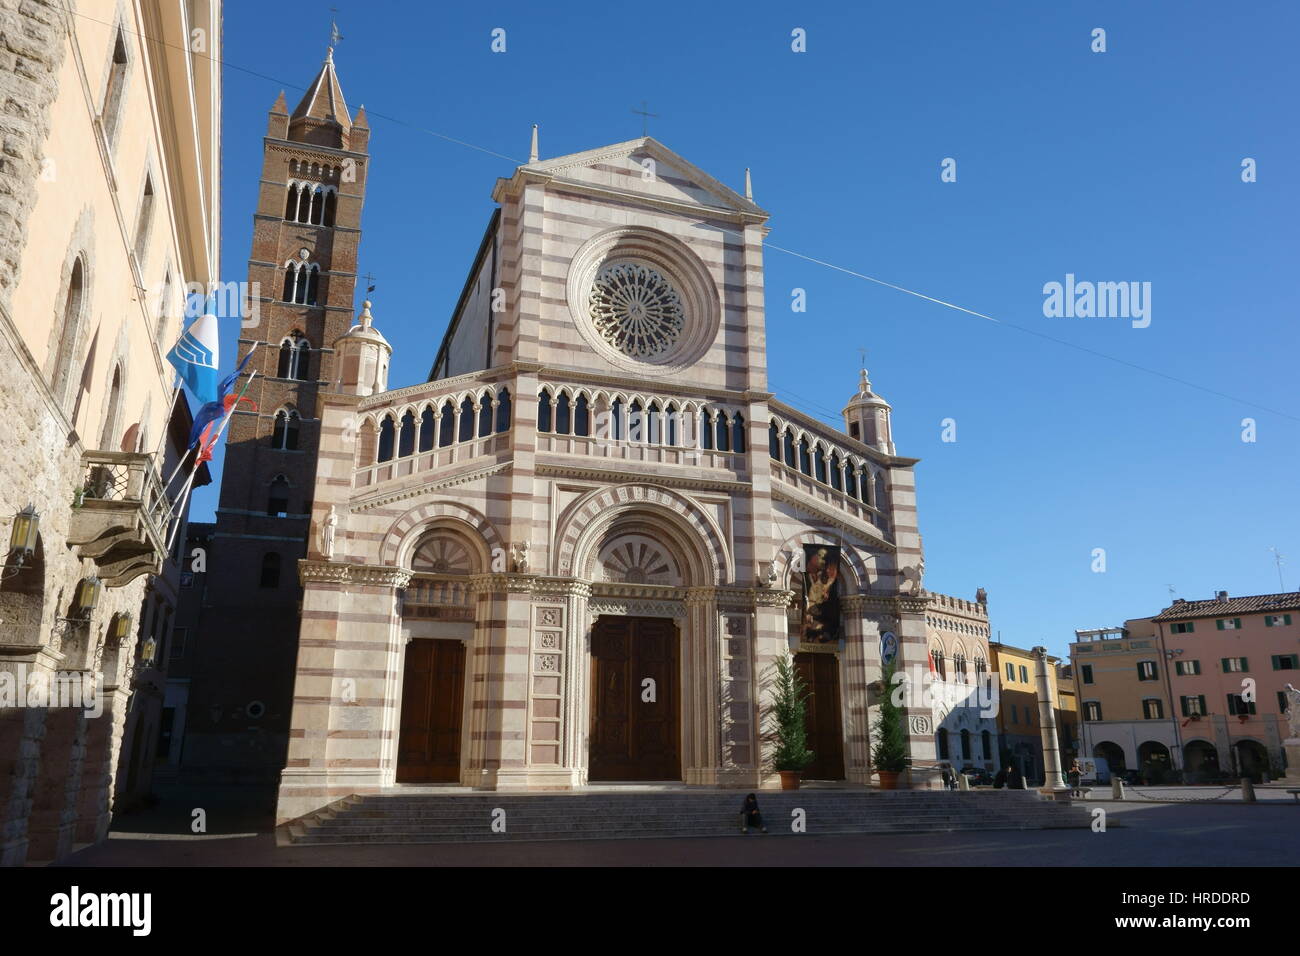 Grosseto Duomo (Cathedral) facade against a clear blue sky - Piazza Dante Alighieri / Piazza Duomo, Grosseto, Tuscany, Italy, Europe - Wide angle view Stock Photo